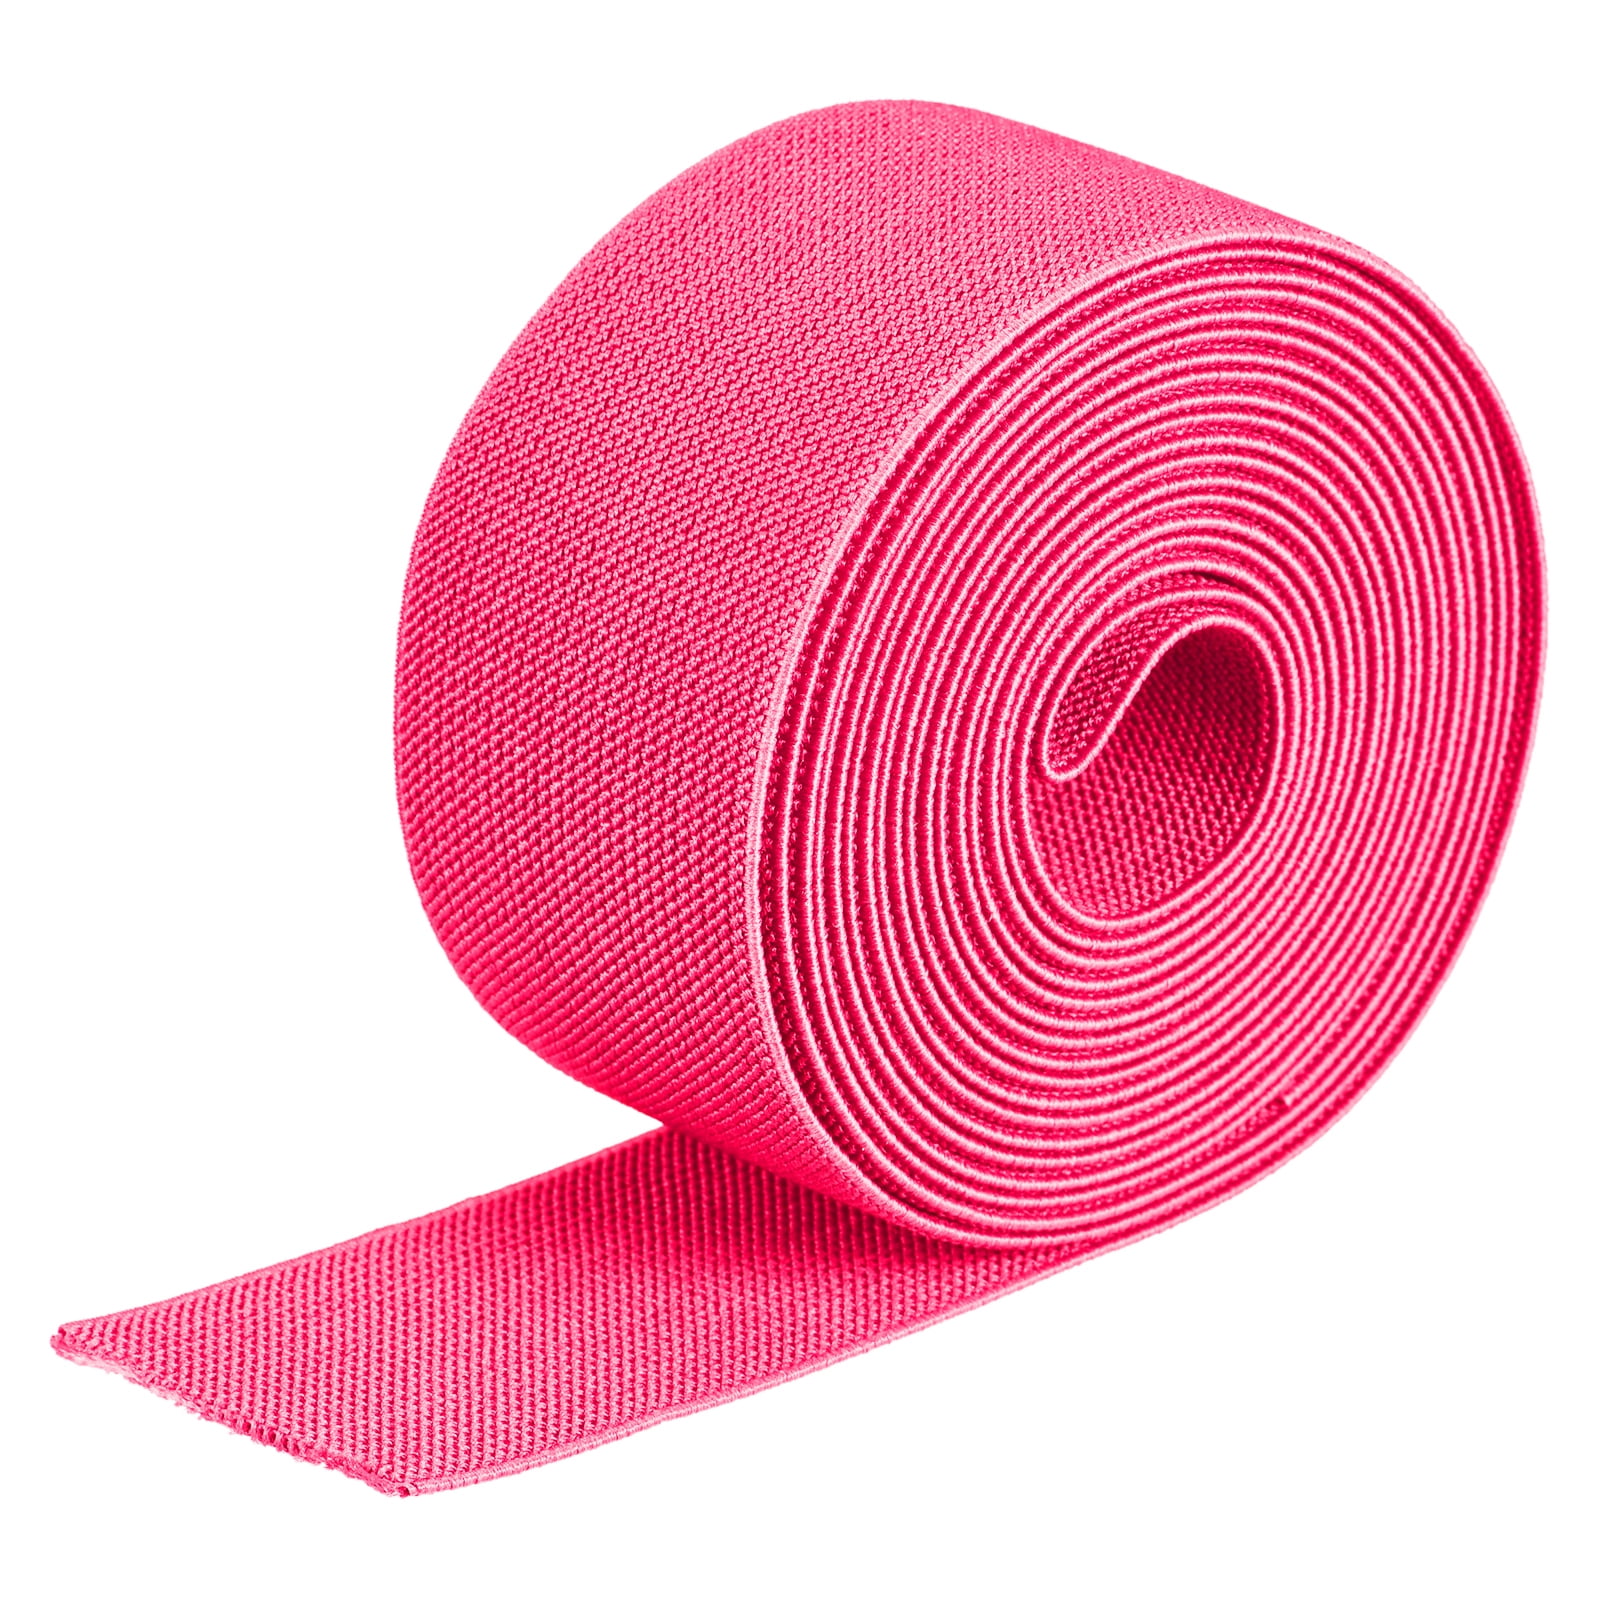 Twill Elastic Band Double Side 2 Flat 2 Yard 1 Roll Flat Elastic Ribbon  Cord Fluorescent Rose Red for Sewing, Waistband